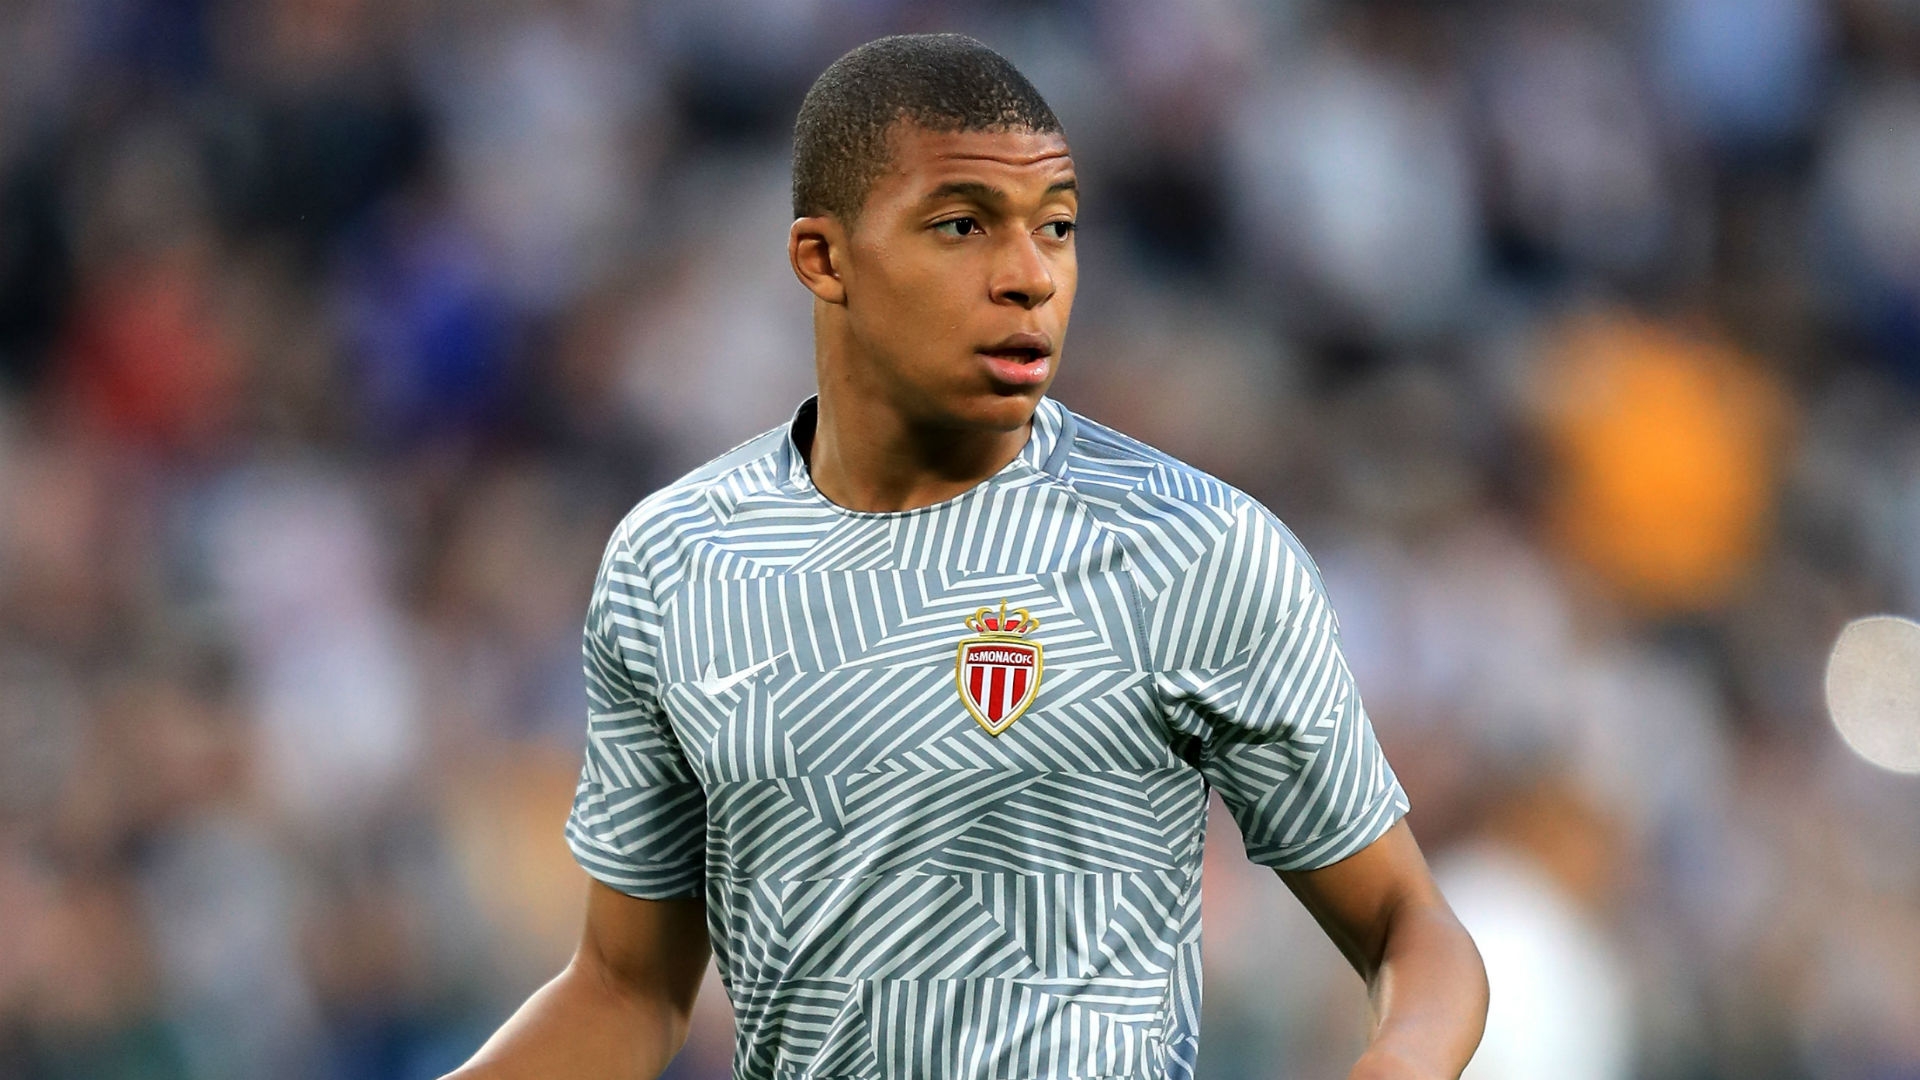 Mbappe has also recently broken into France's national squad.